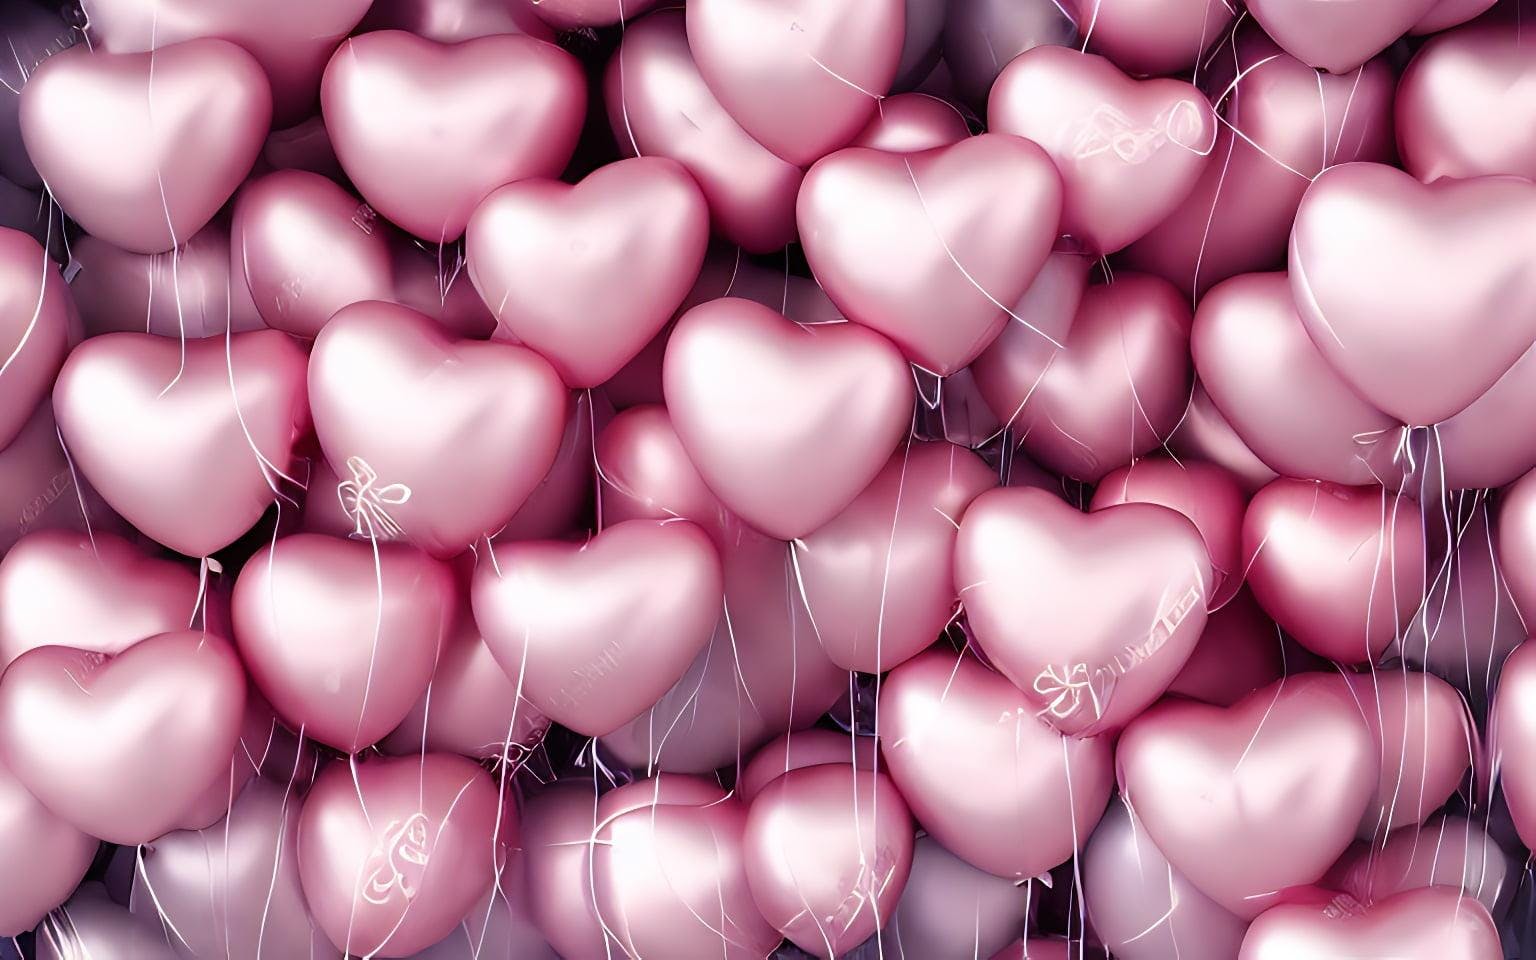 Detailed Photo That Is Beautiful And Whimsical With Cotton Candy Clouds And Balloon Hearts And Flowers Inside